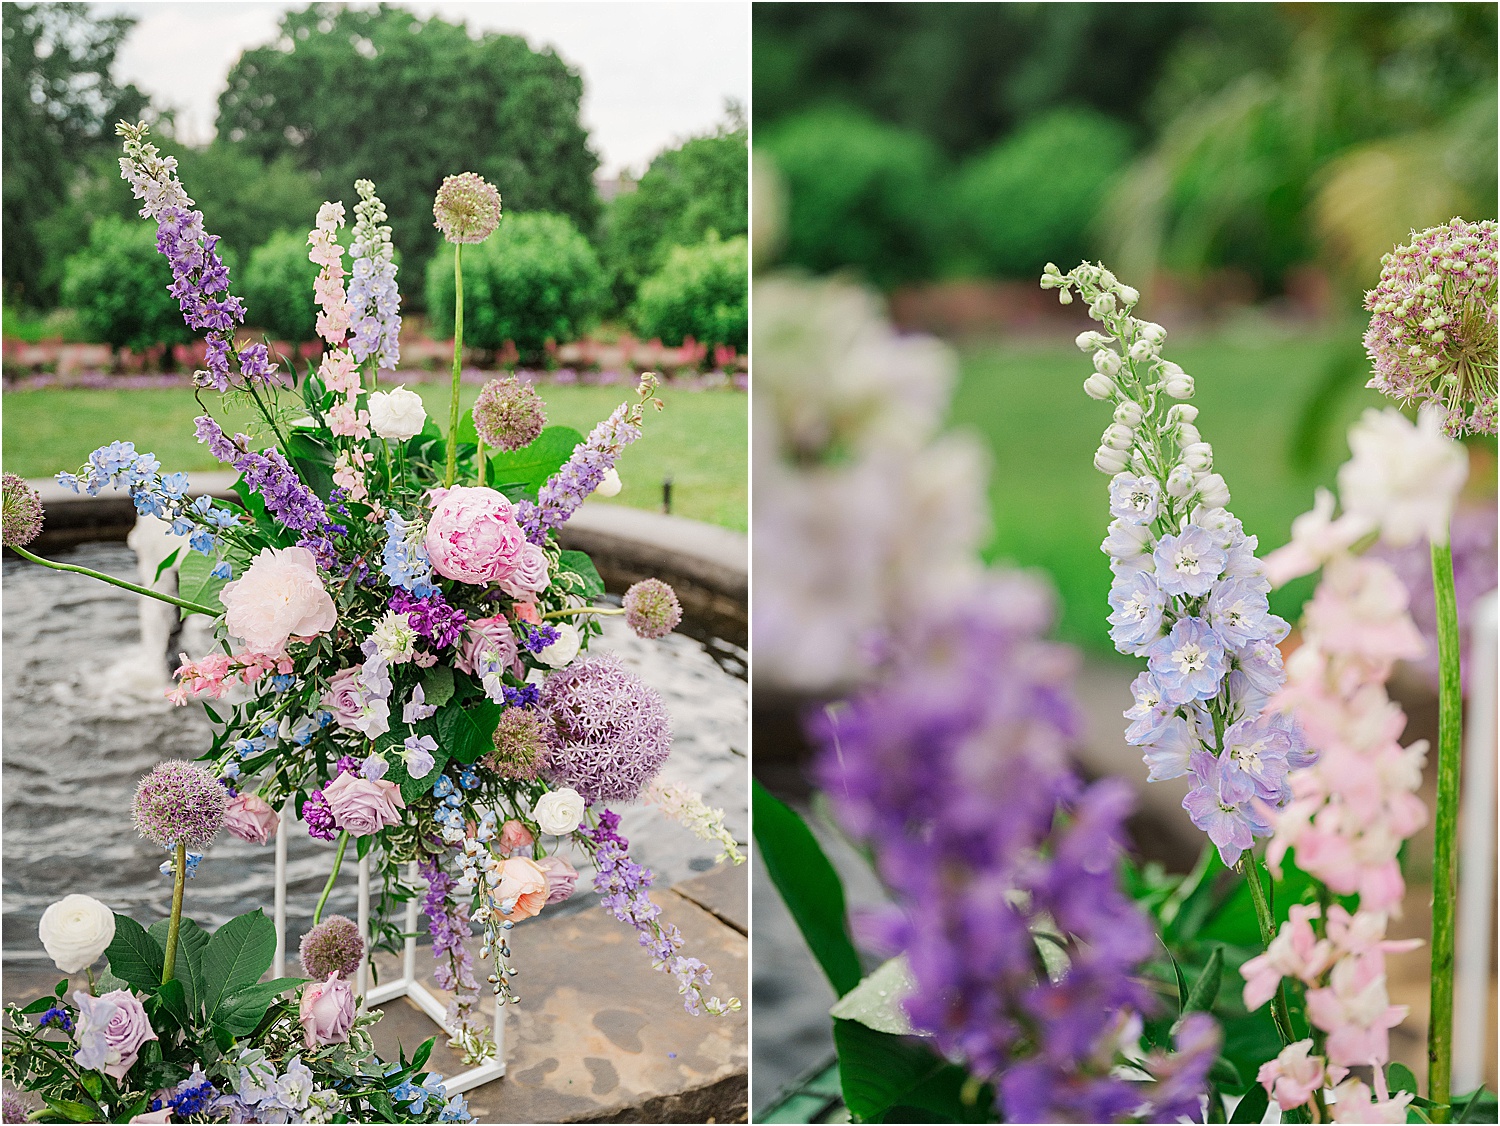 wedding flowers blue pink purple lilac • Wild Weather - Love at a Phipps Conservatory Outdoor Garden Wedding